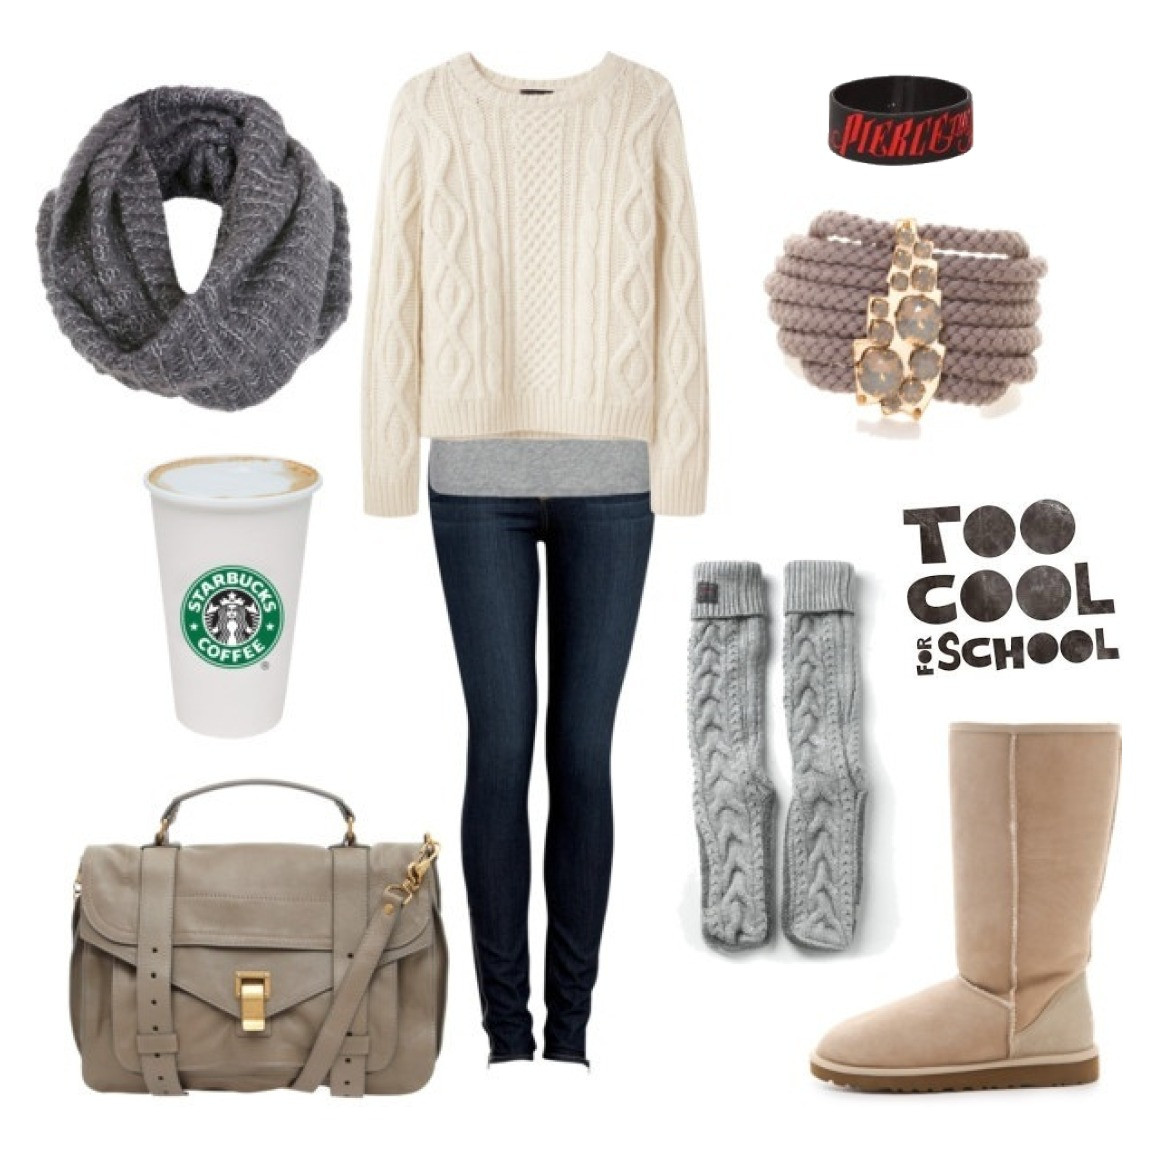 Cute Winter Outfit Ideas
 30 Stylish Outfit Ideas for Winter Winter Outfit Ideas